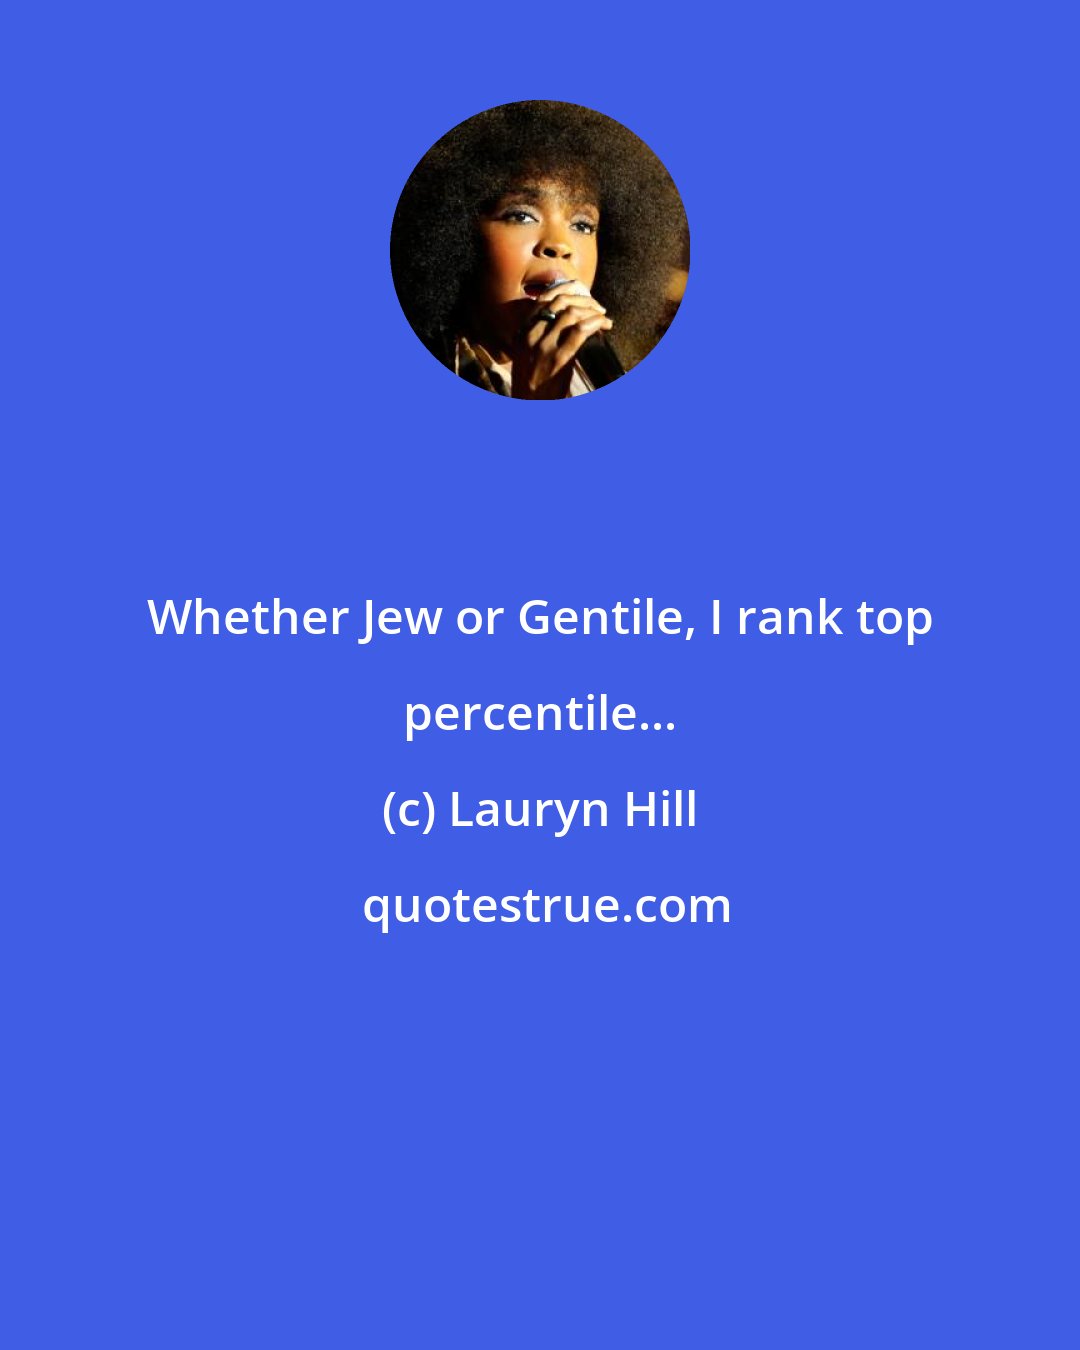 Lauryn Hill: Whether Jew or Gentile, I rank top percentile...